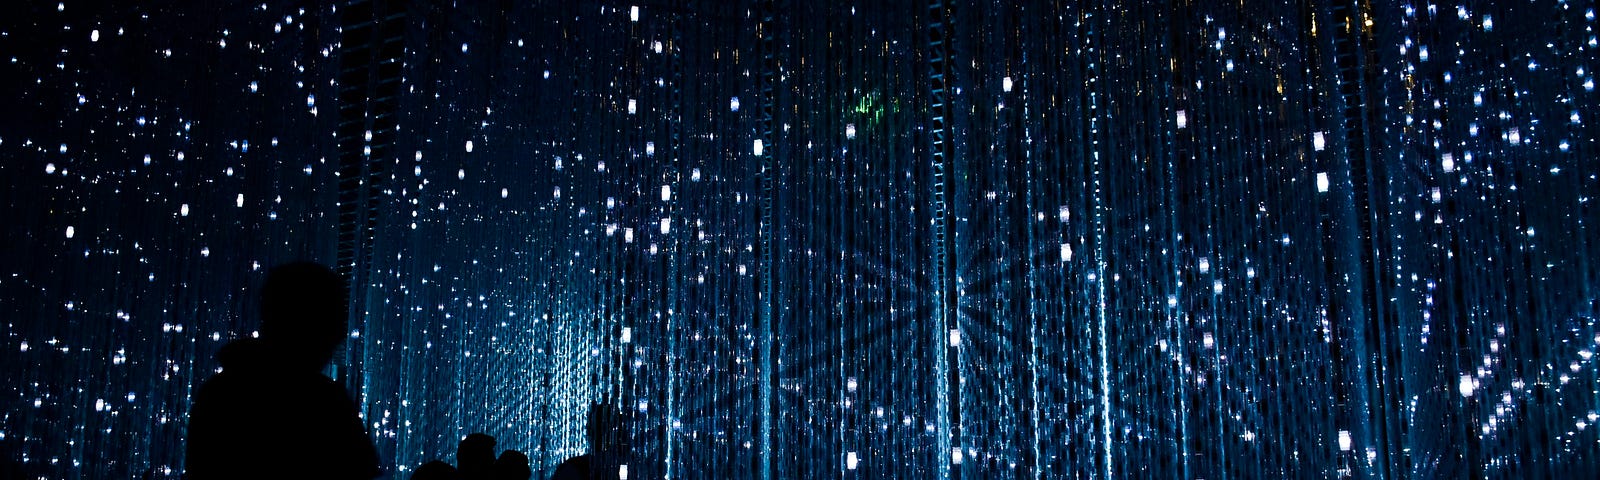 Shadowy figures in a grid of blue-white lights in a dark space